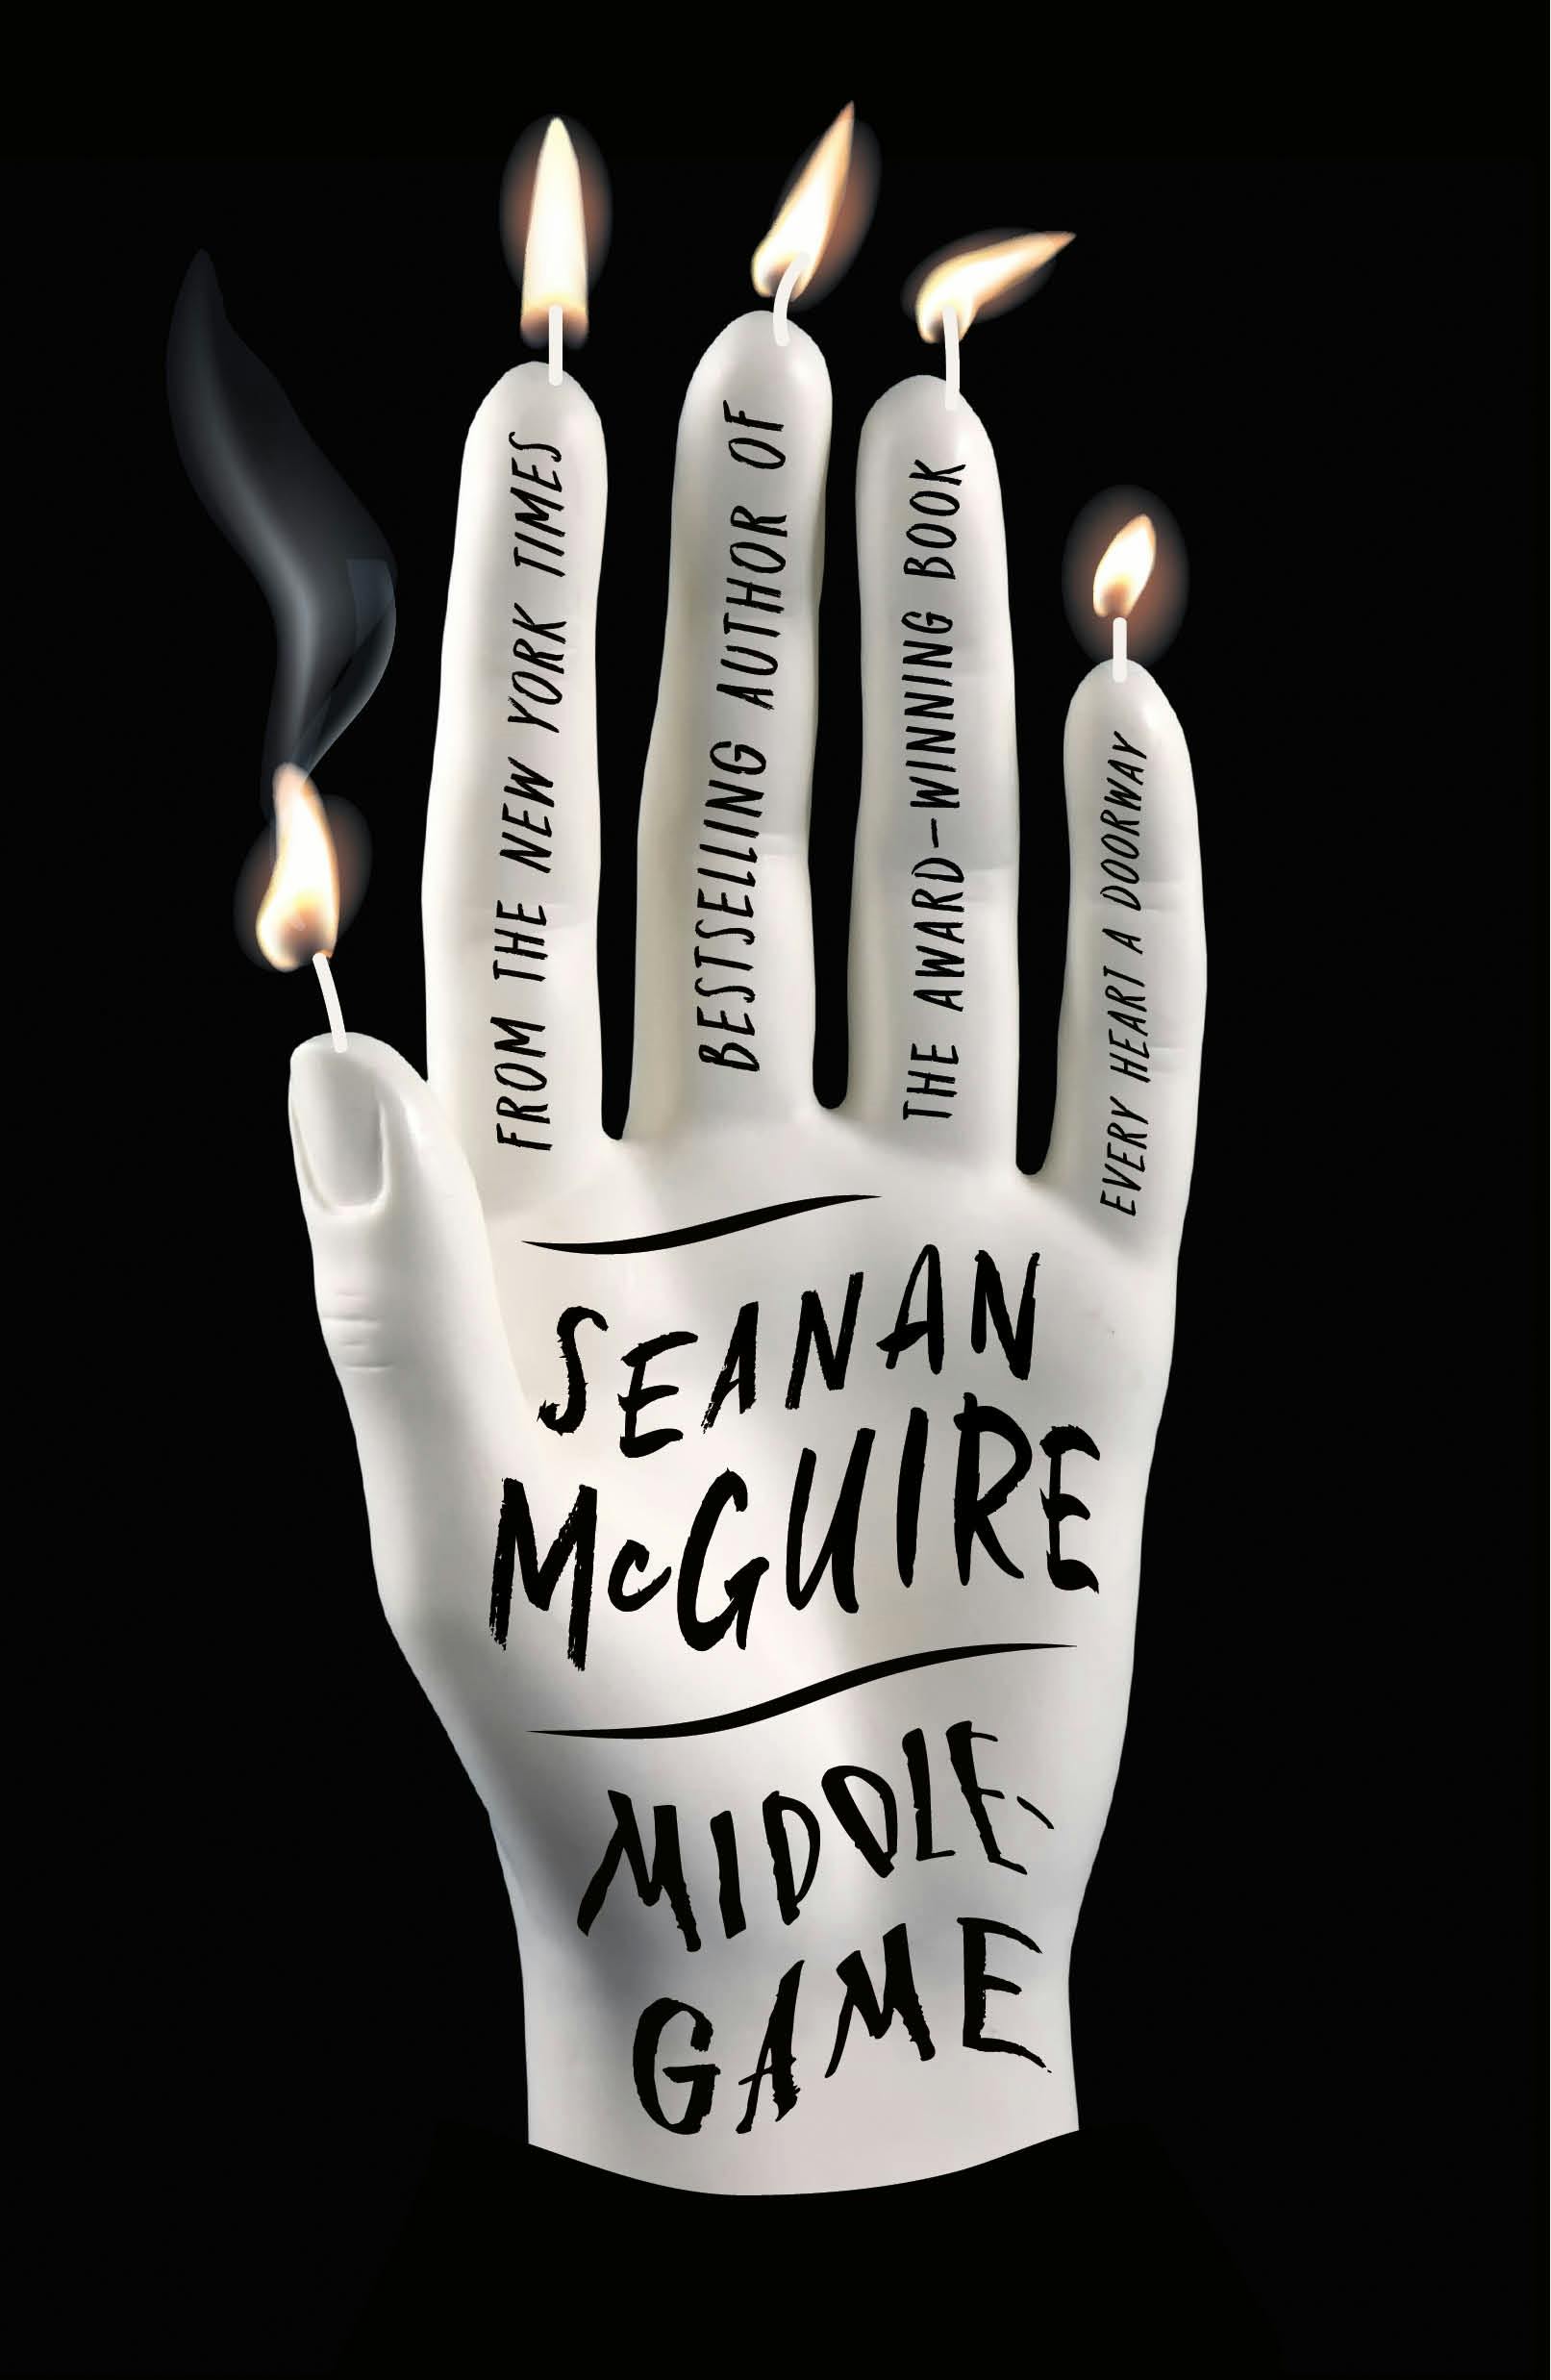 Cover for the book titled as: Middlegame